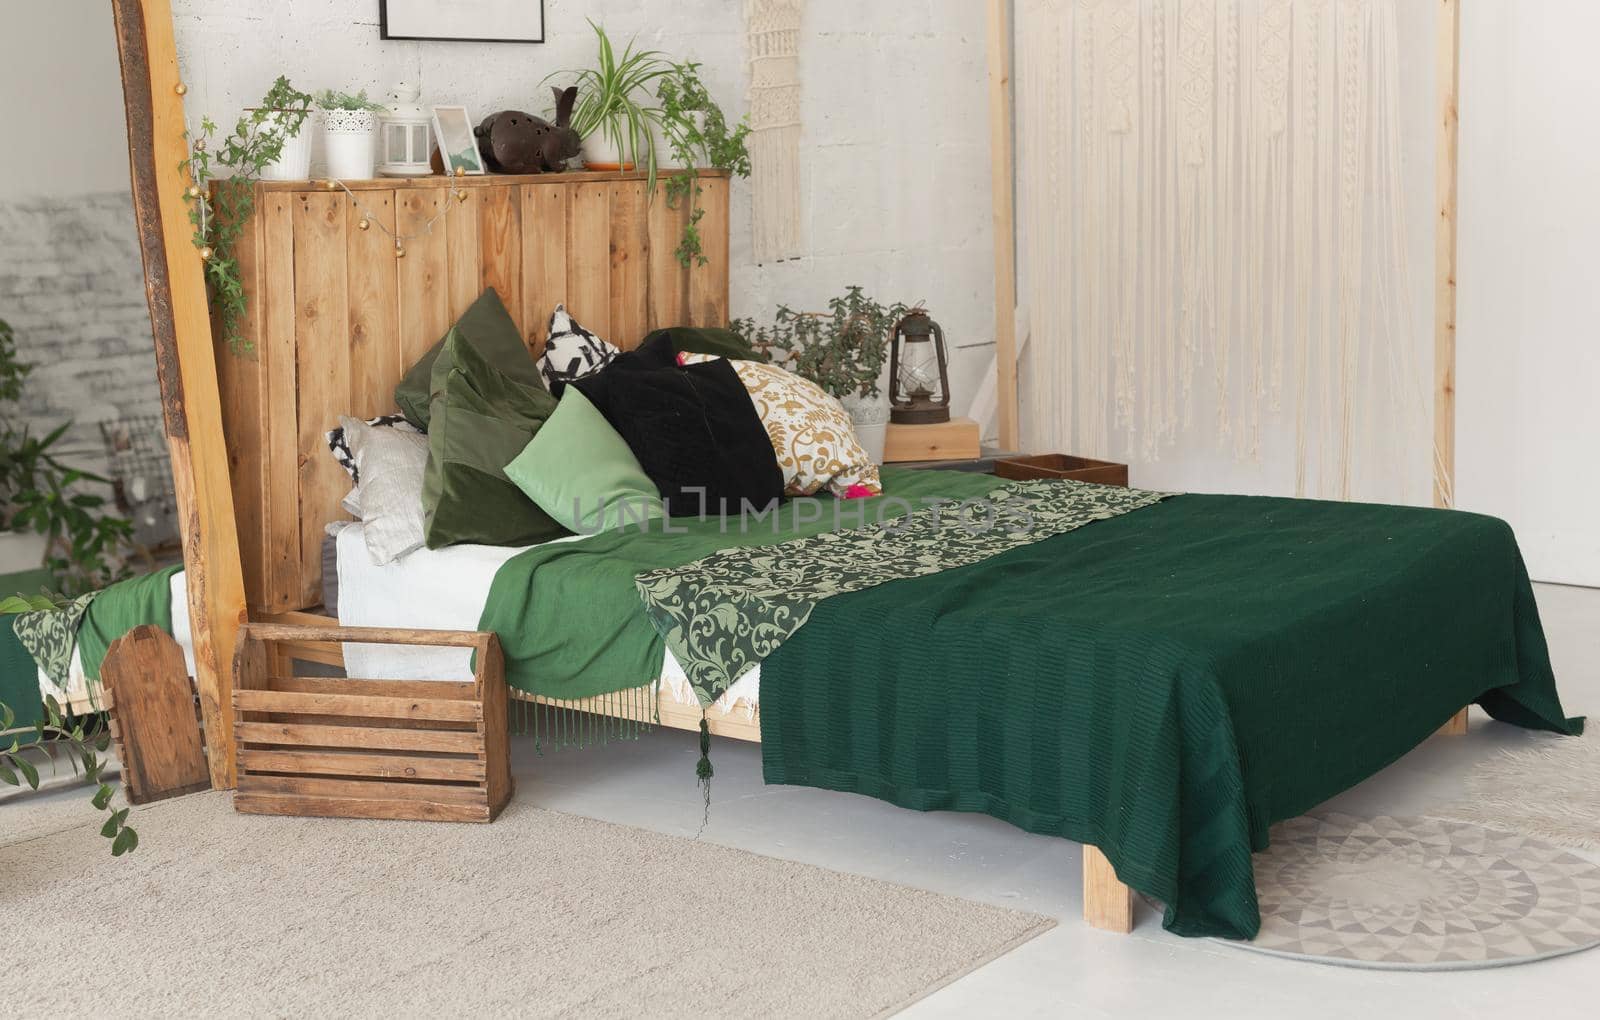 Comfortable bed with new green linens in eco style room interior.